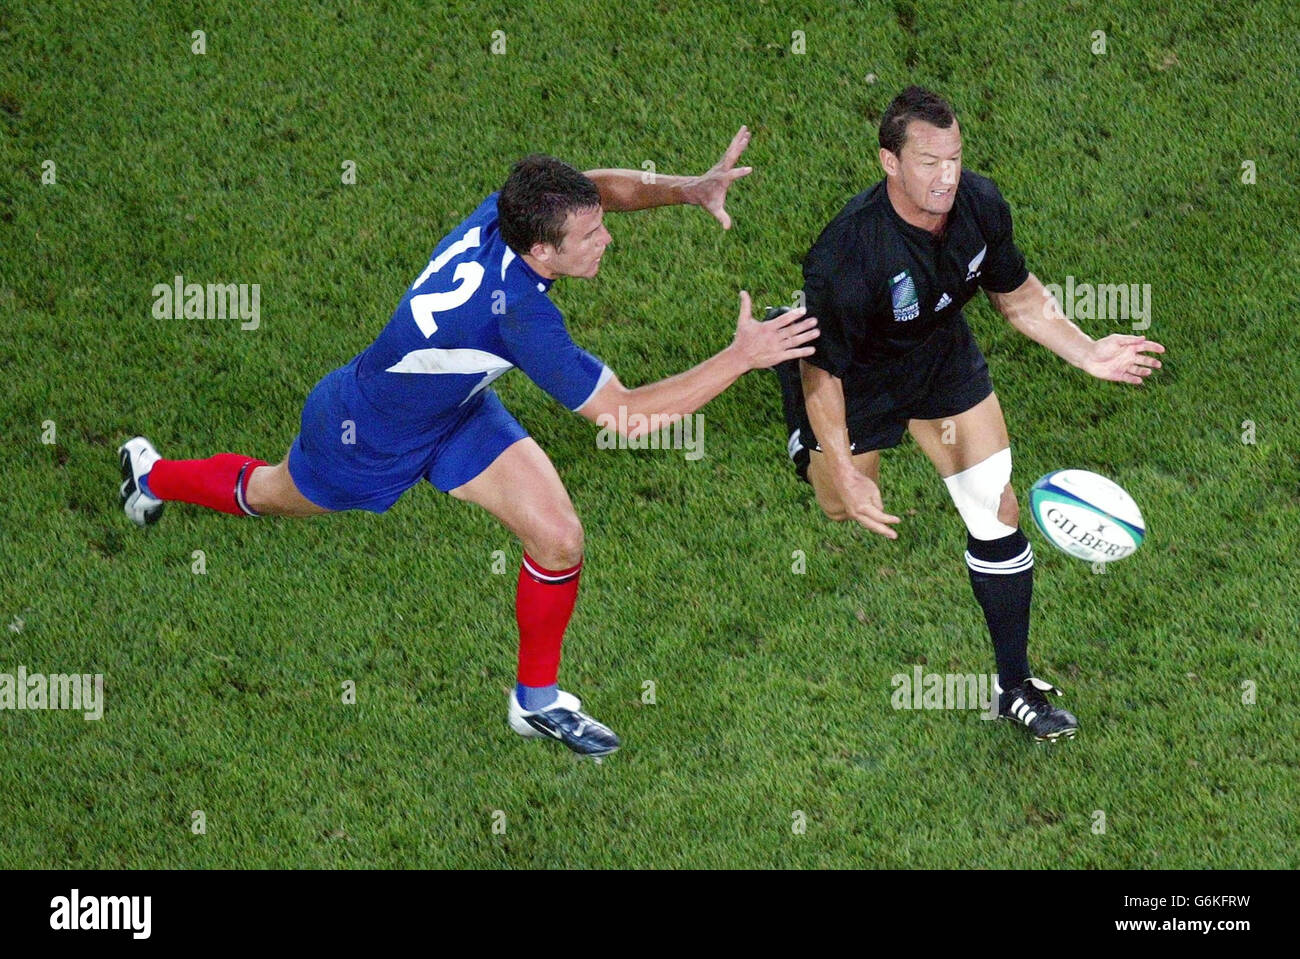 New Zealand's Carlos Spencer gets his pass away as he is tackled by Damien Traille of France during their 40-13 victory over France in the Rugby Union World Cup 3rd place playoff match at Telstra Stadium, Sydney. Stock Photo